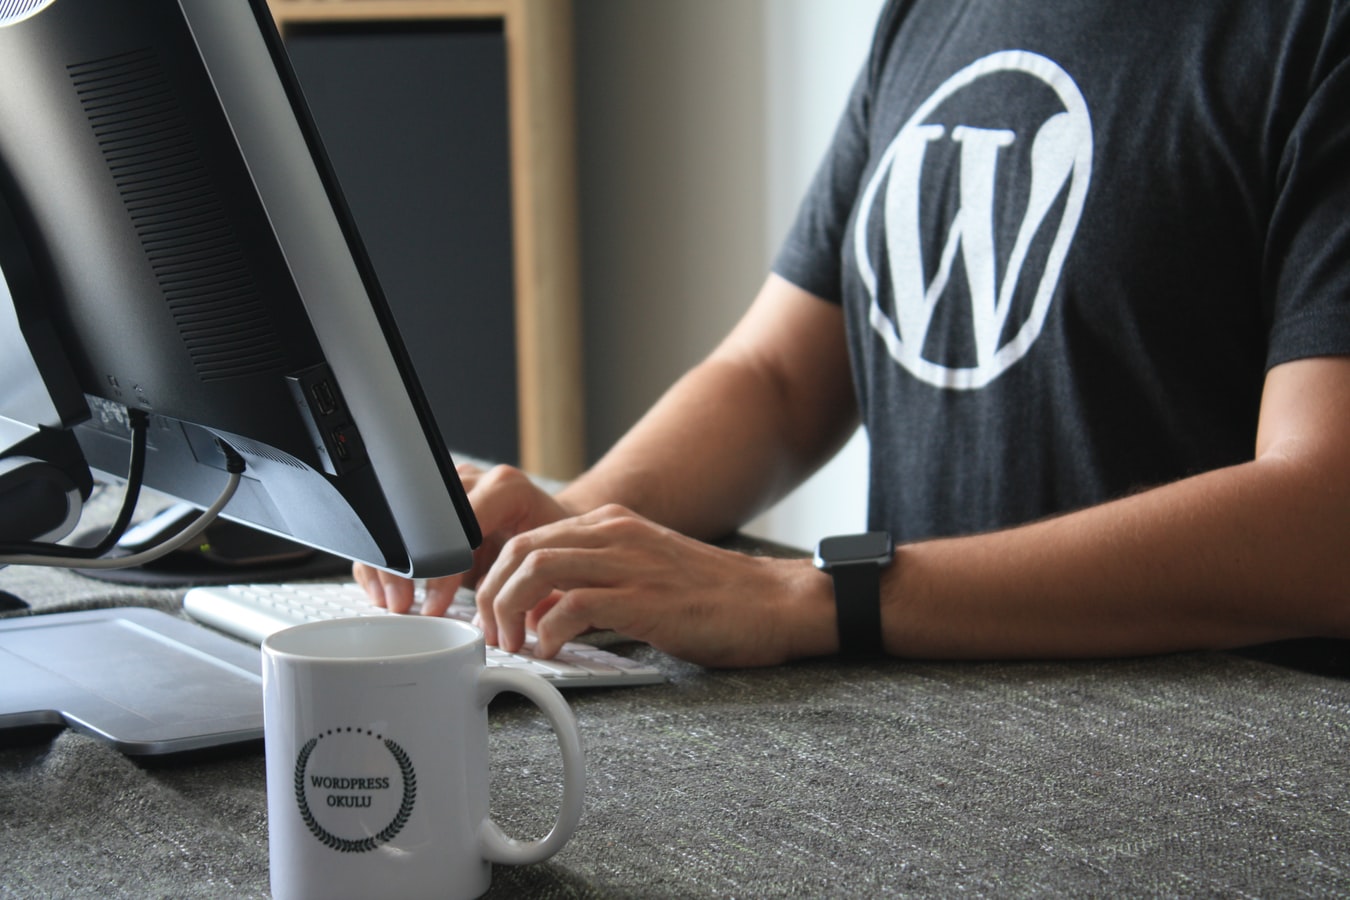 10 Tips for a great WordPress website